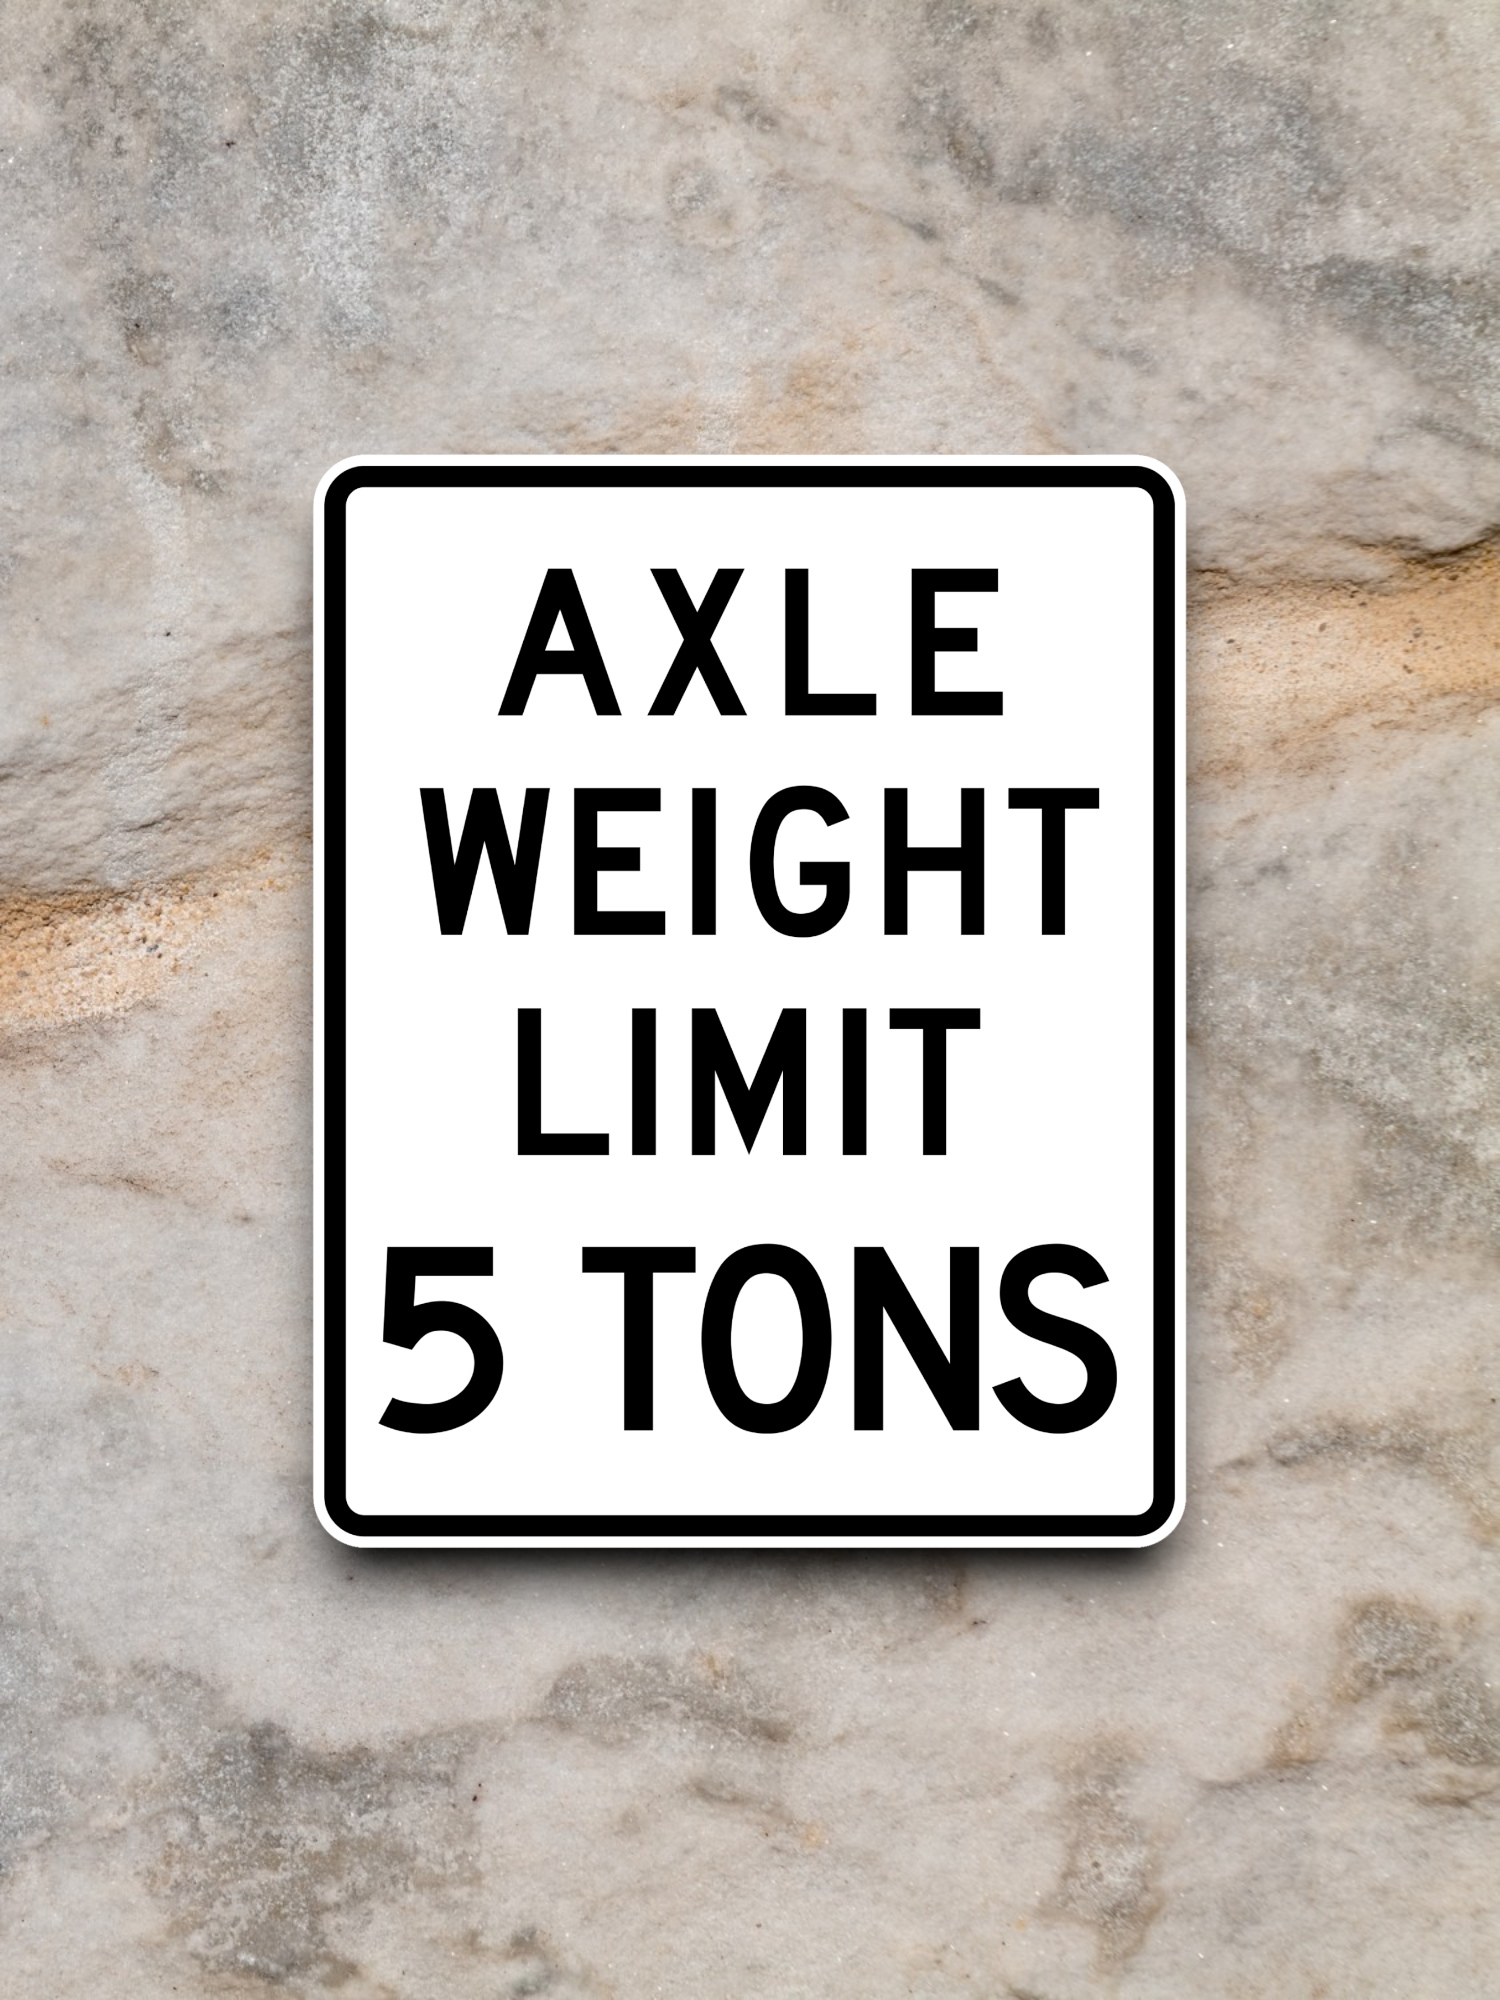 Axle weight limit 5 Tons United States Road Sign Sticker